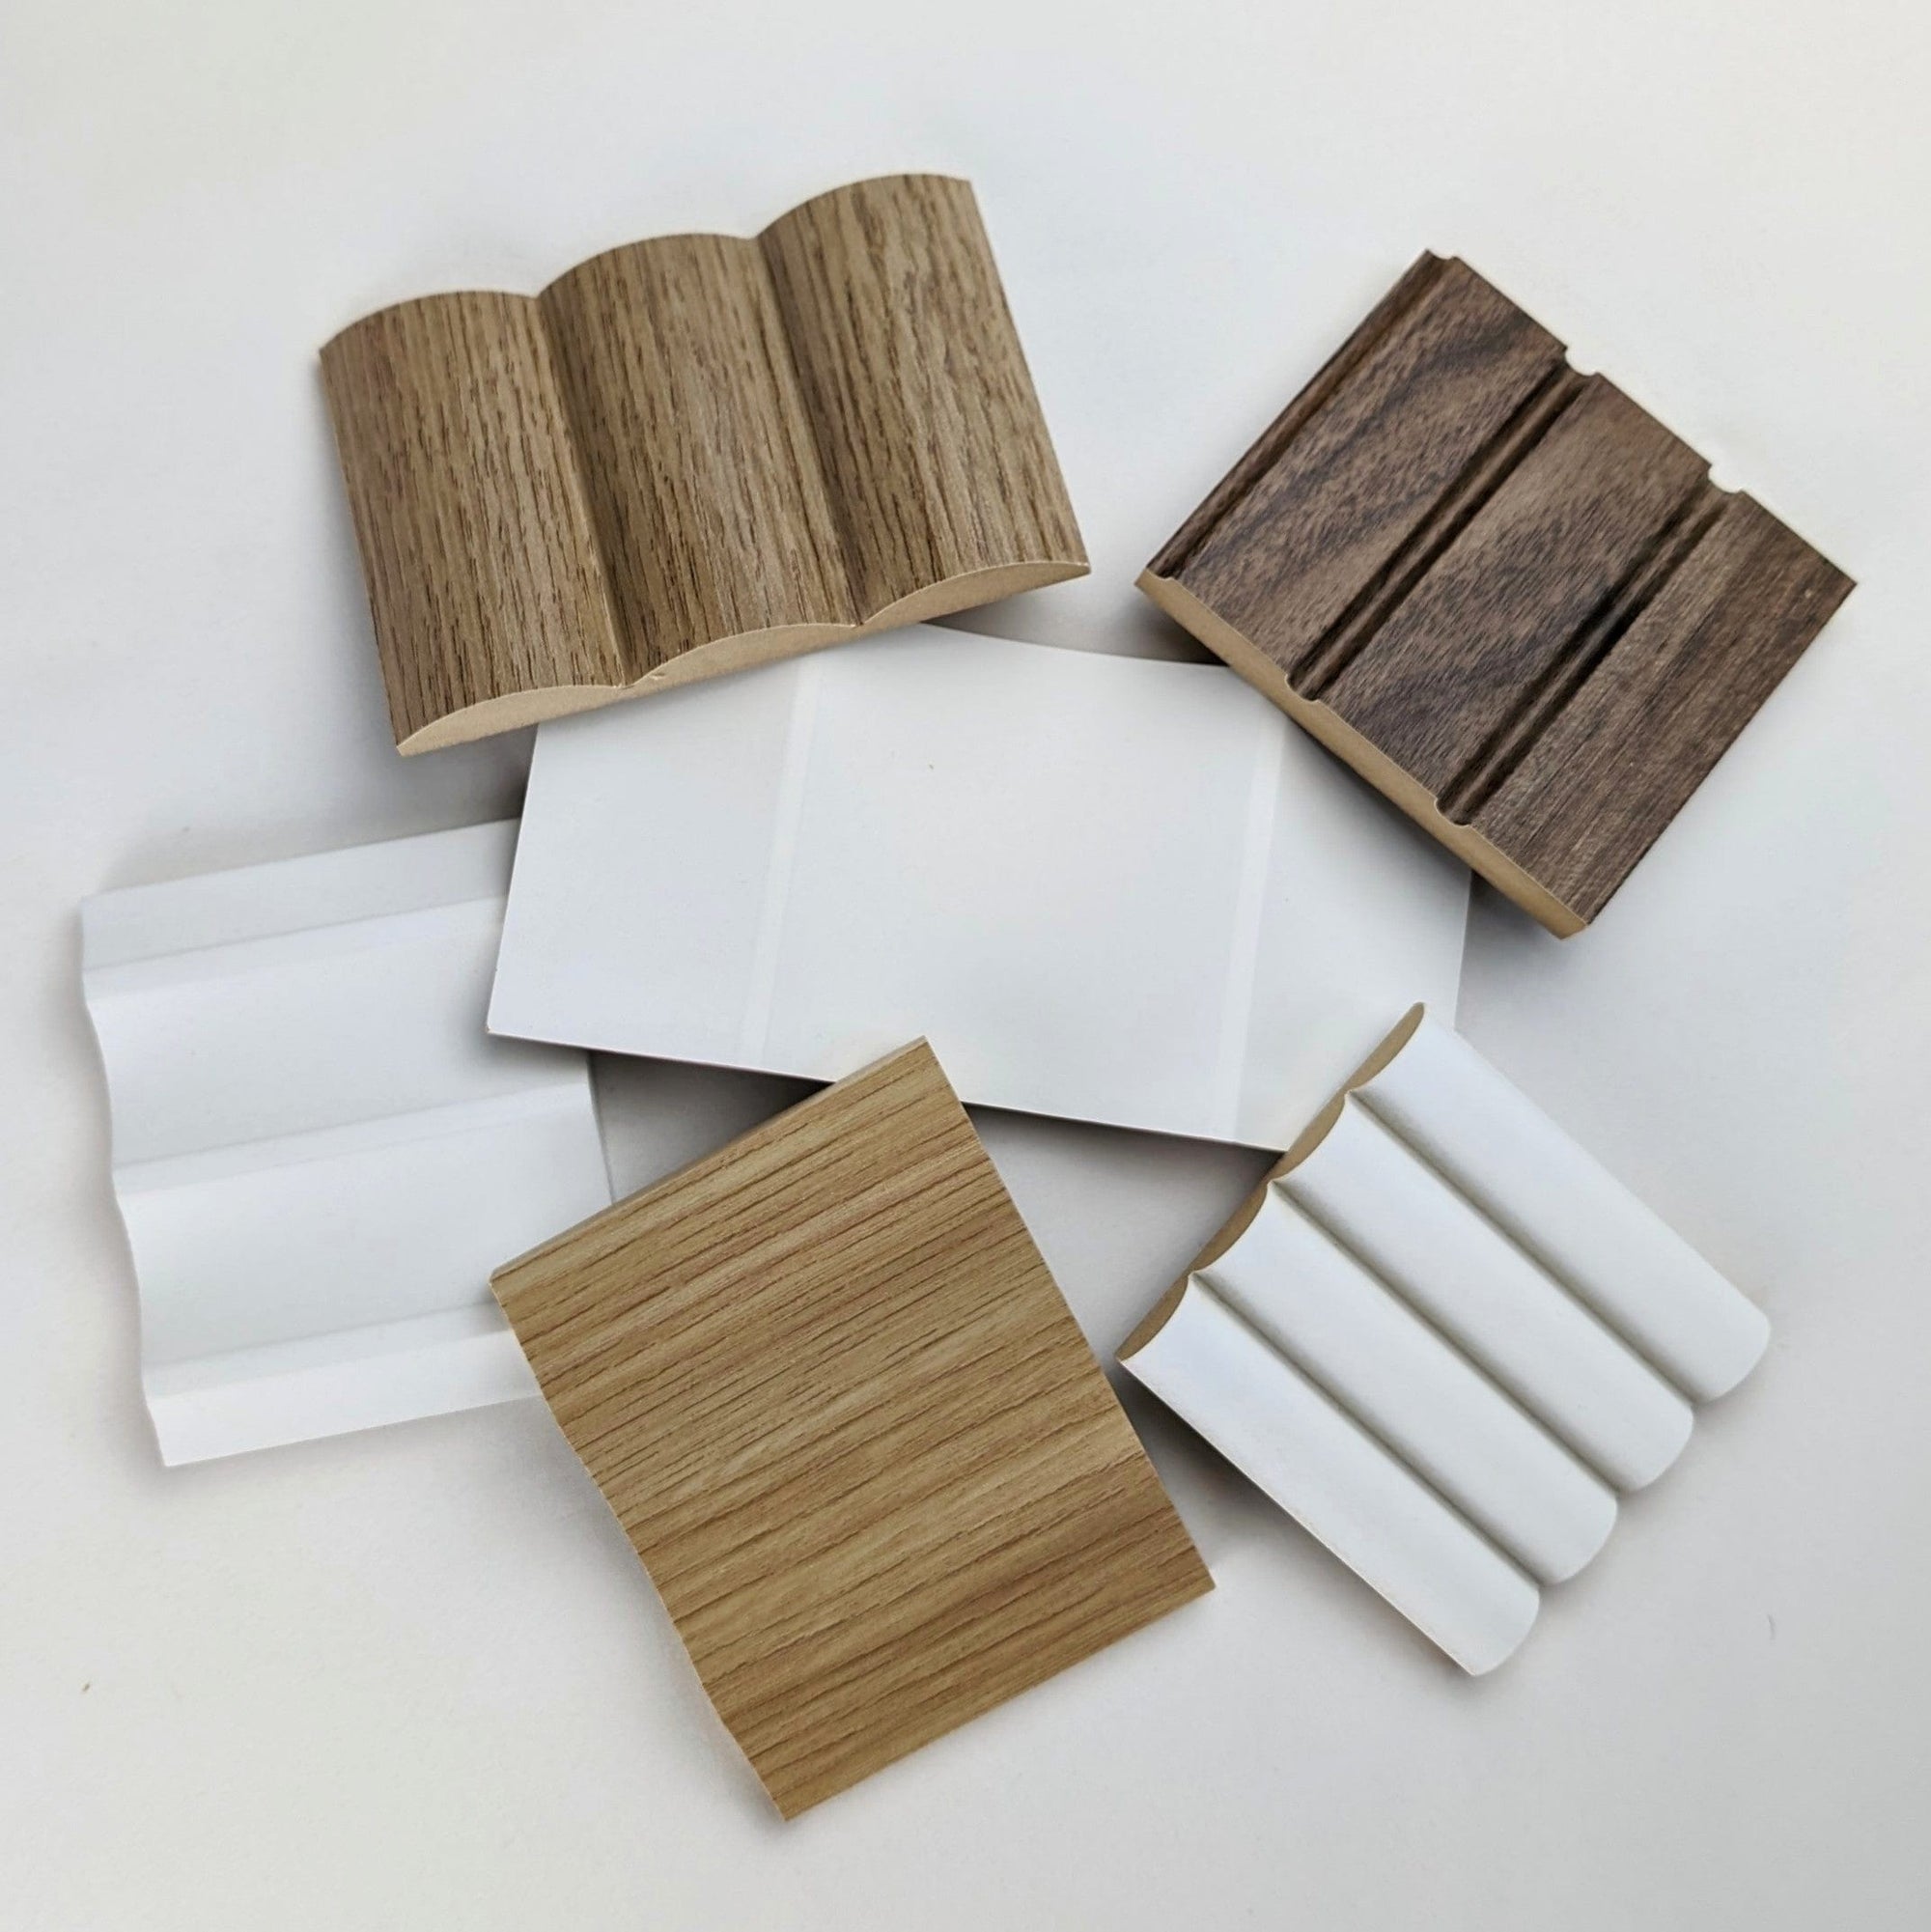 Walston Architectural Products Wall Panel SAMPLE PACK: FLUTED, REEDED, & SLAT WALL PANELS / WALL CLADDING